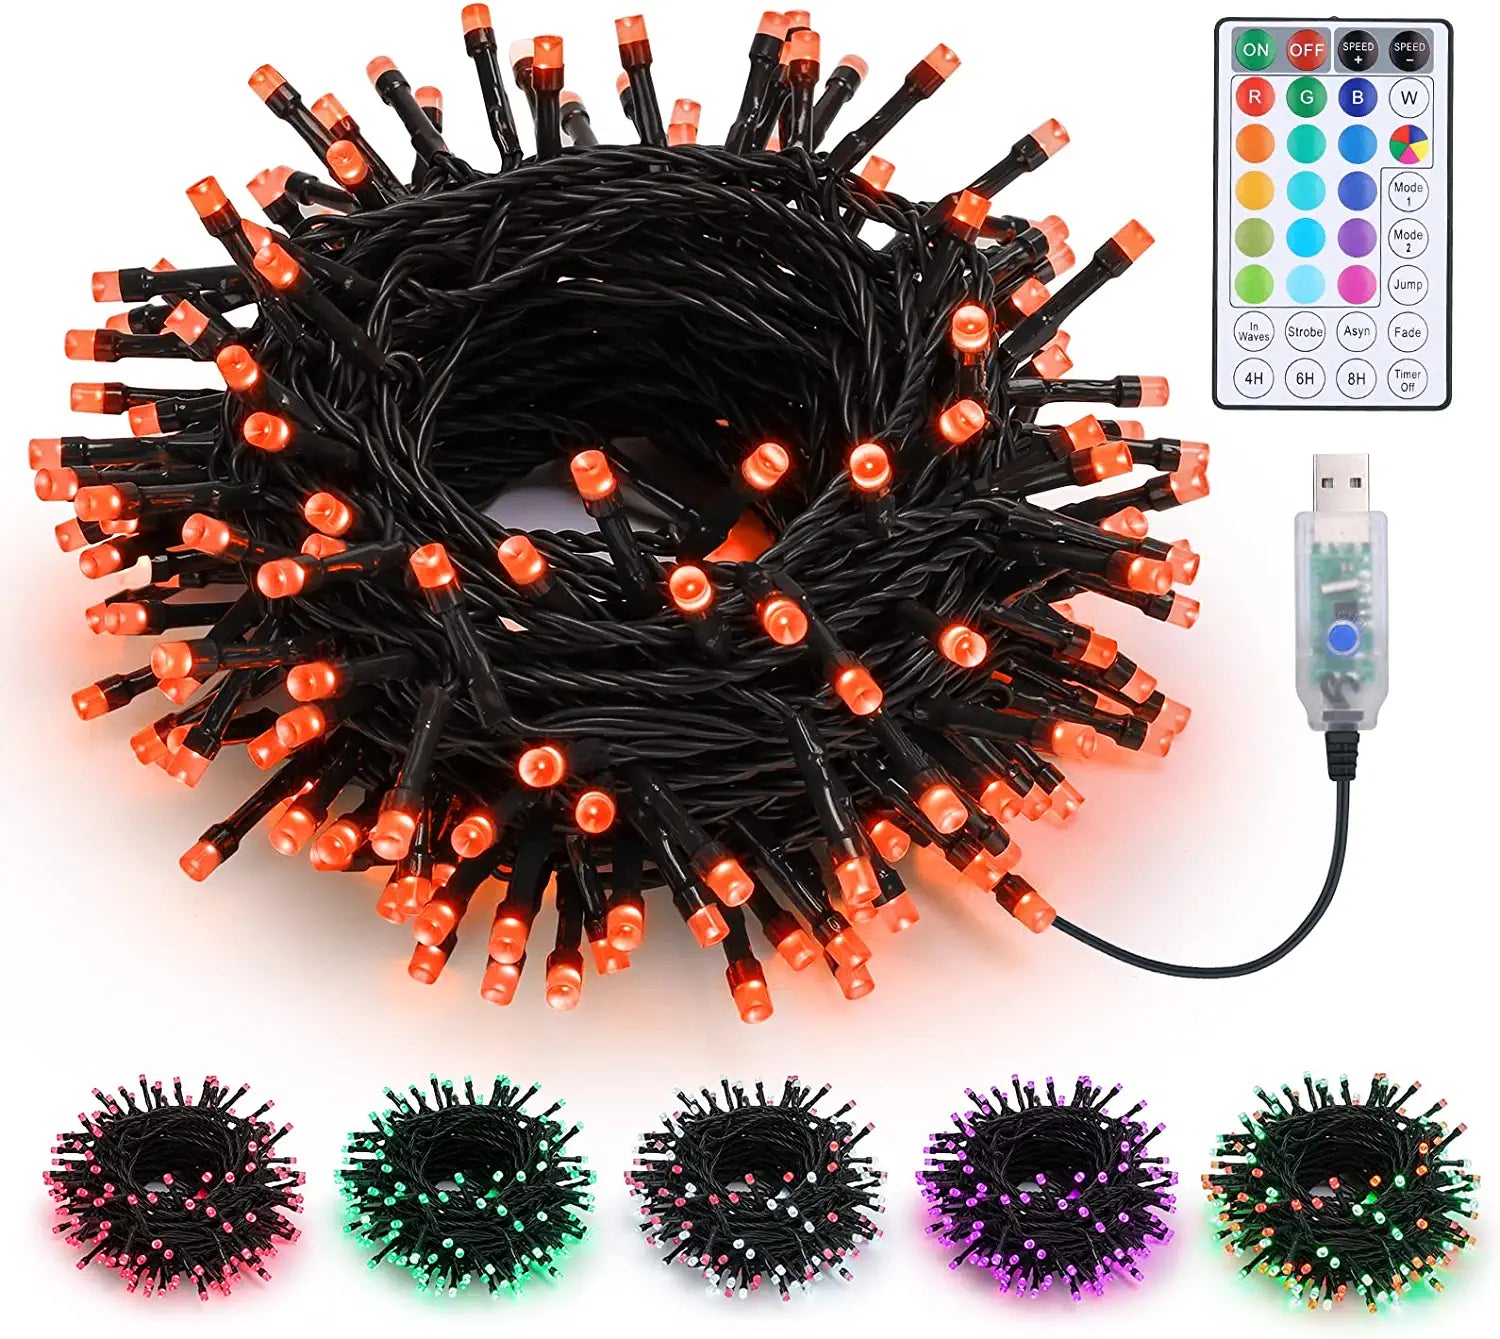 BrizLabs 33ft 100 LED USB Powered RGB Color Changing String Lights with 32-Keys Remote